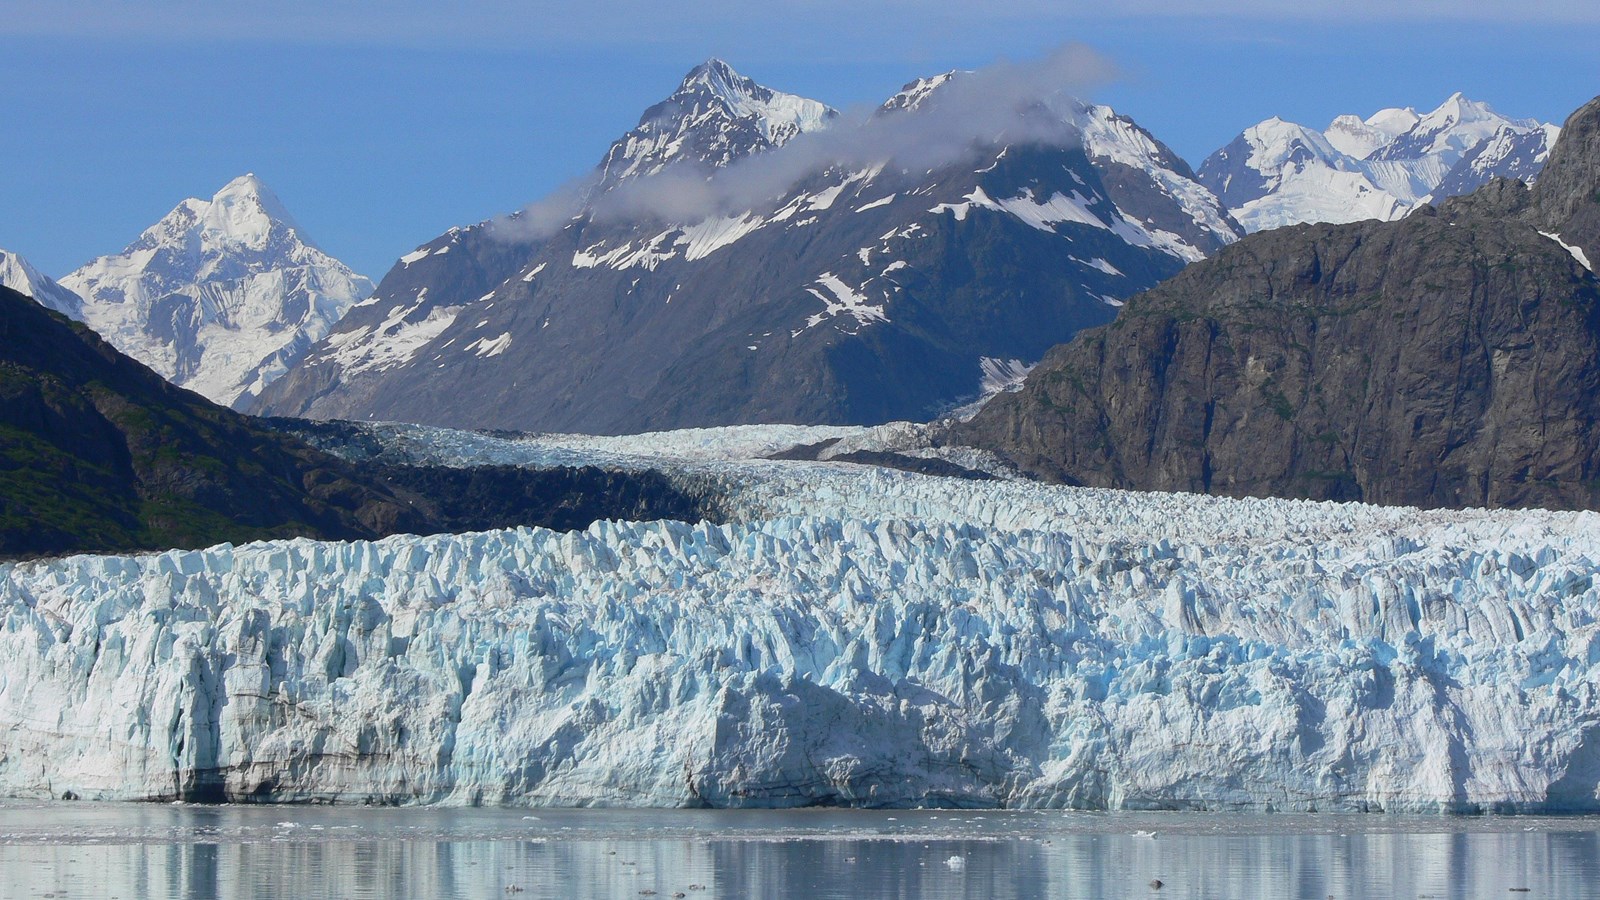 Margerie Glacier can be seen flowing down from the Fairweather Mountains into Glacier Bay.